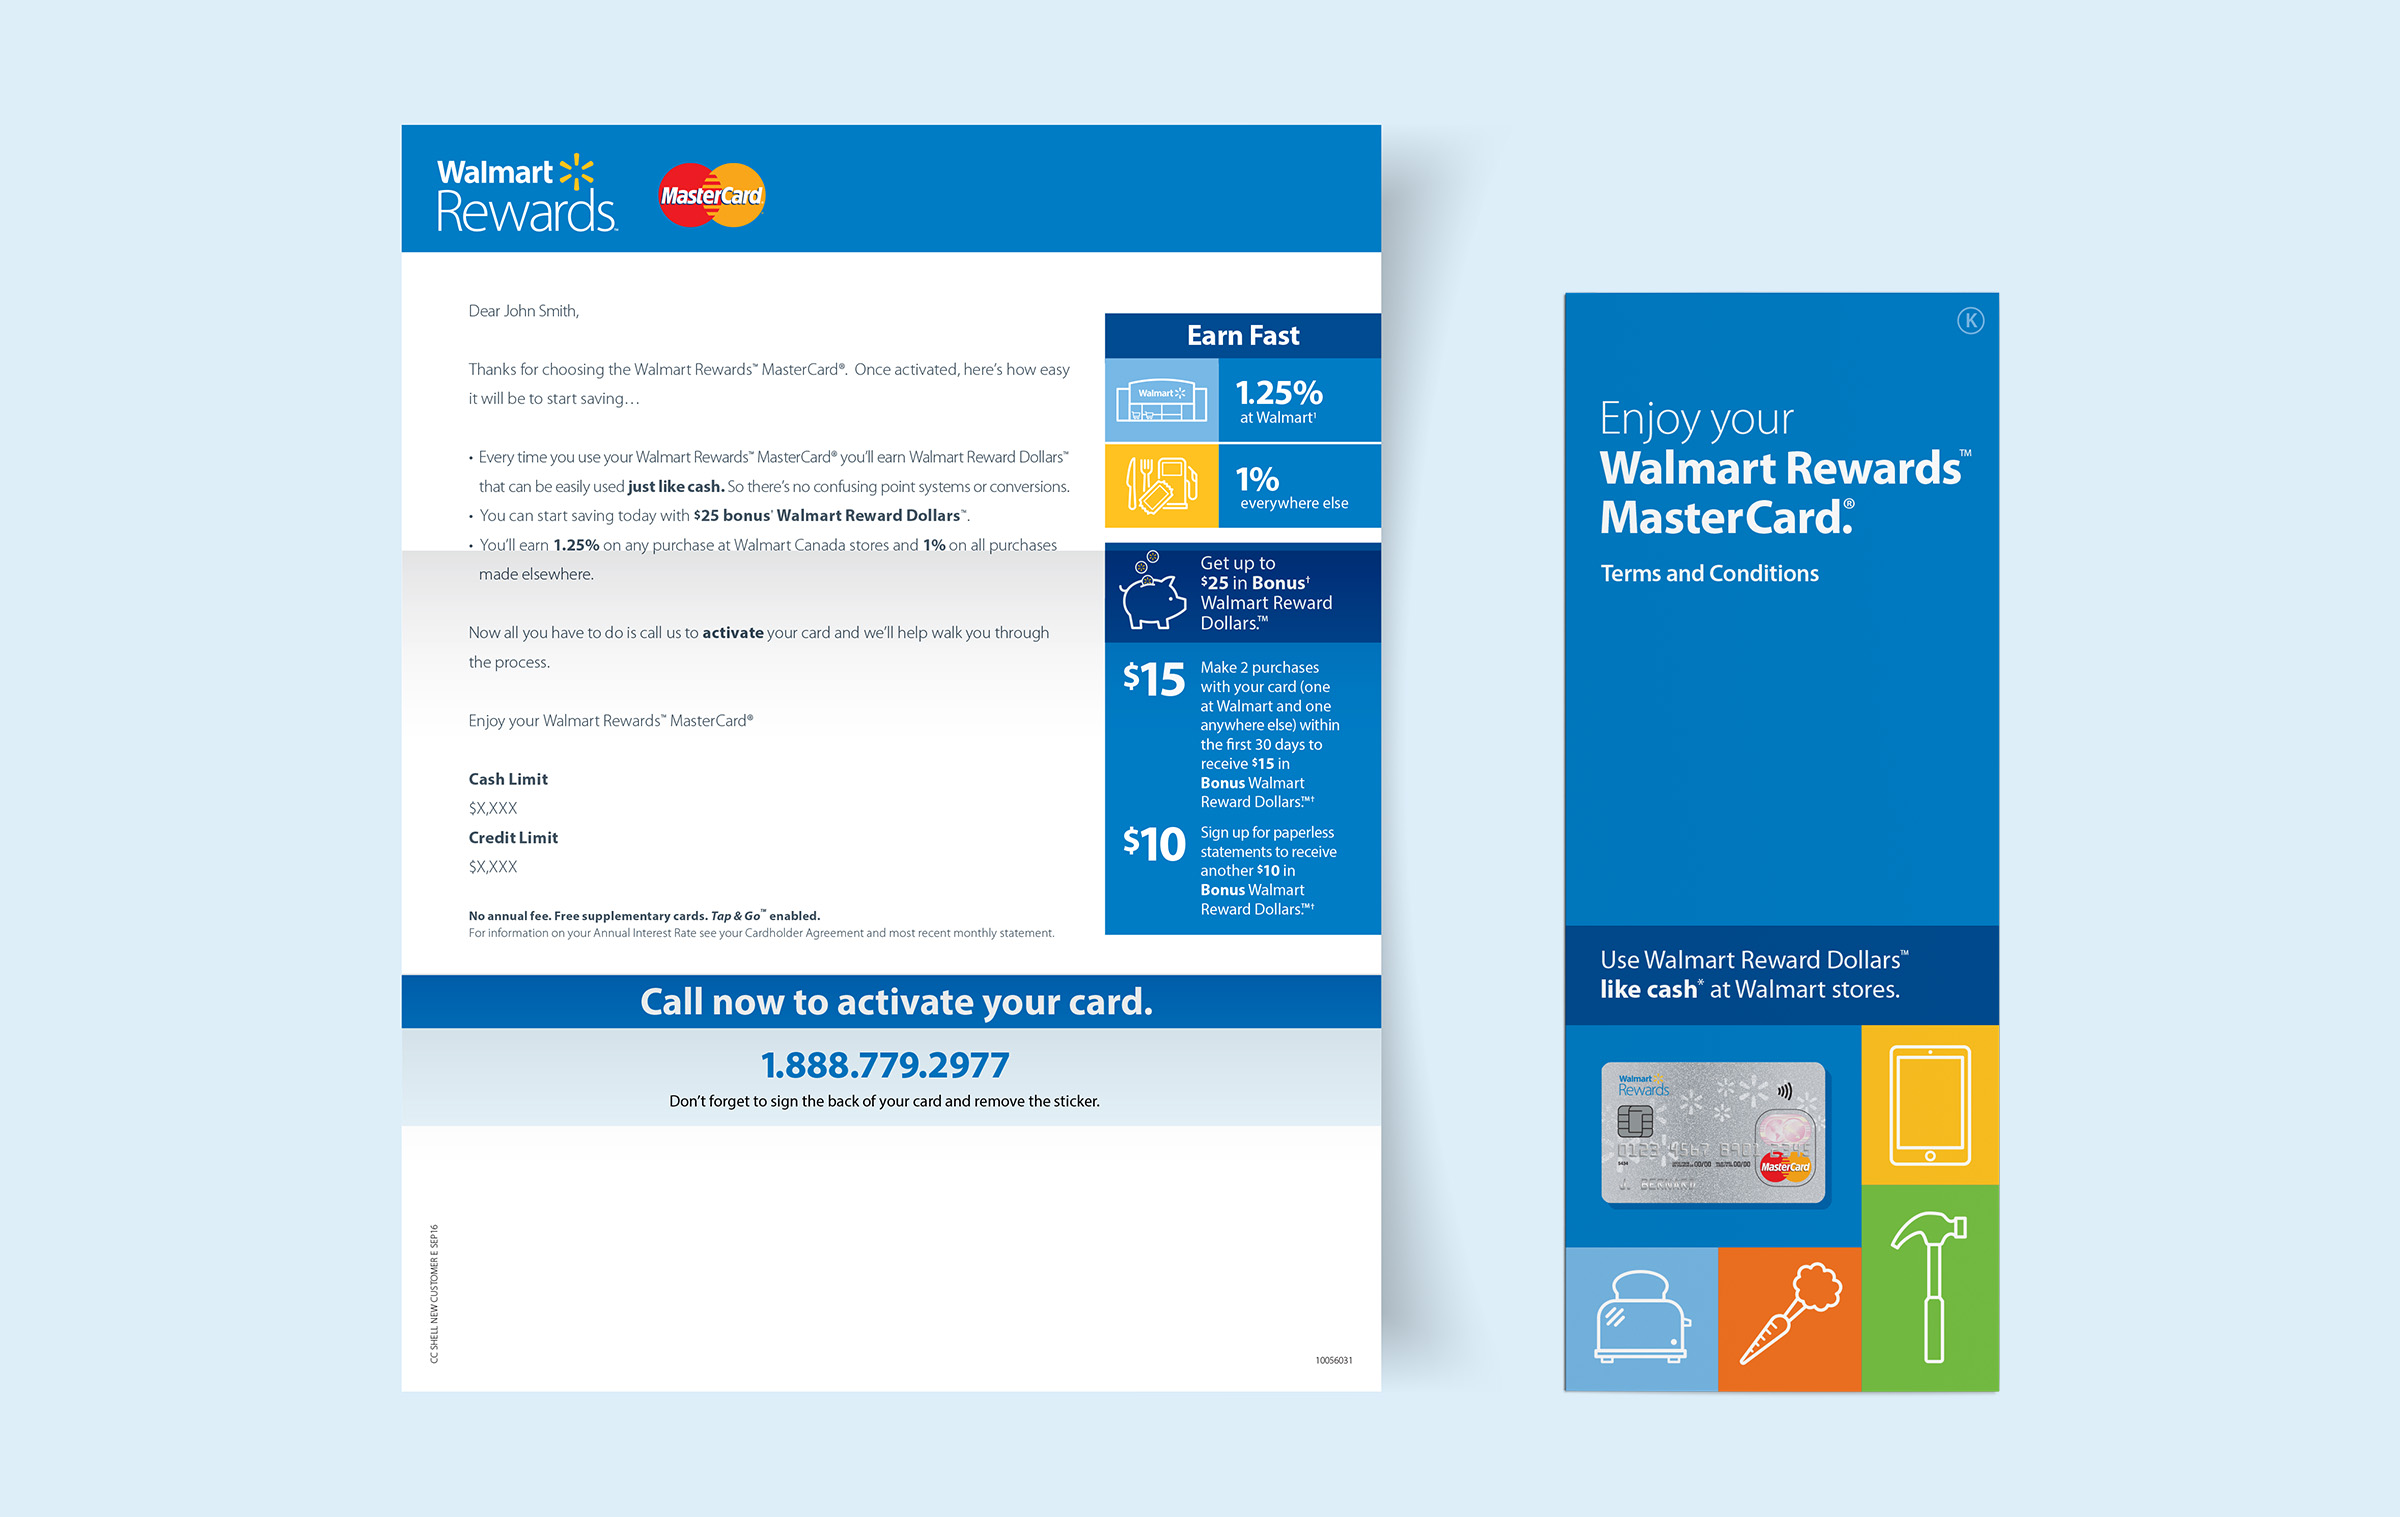 Walmart Rewards signup welcome letter and a terms and conditions brochure